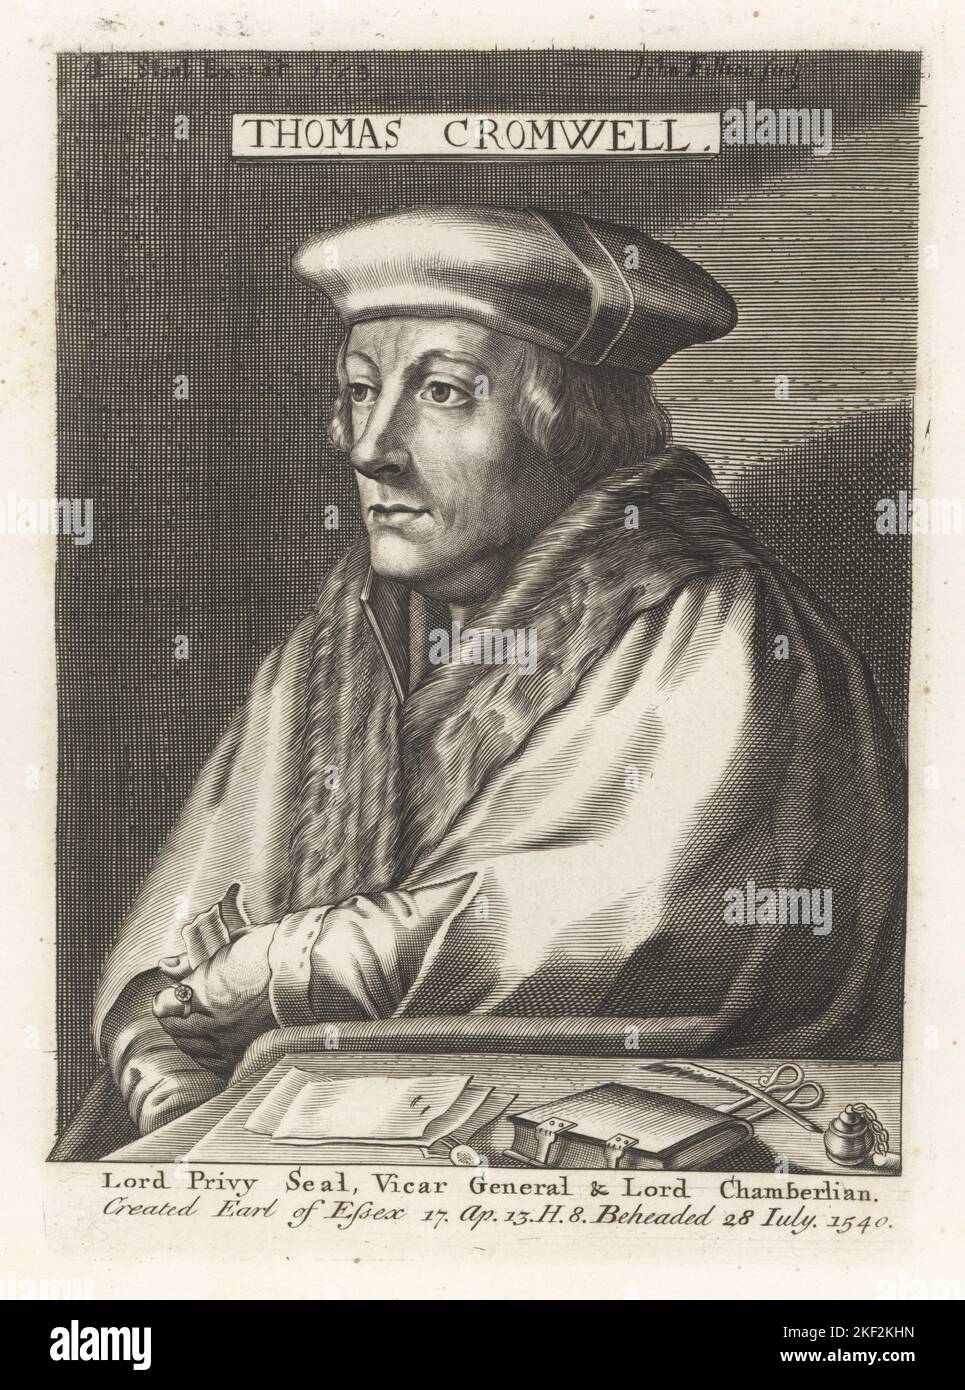 Thomas Cromwell, Earl of Essex, c.1485-1540. Lord Privy Seal, Vicar General and Lord Chamberlain to King Henry VIII of England. Beheaded 28 July 1540. At his desk with quill pen, papers, inkwell, book with clasps. Copperplate engraving by John Filian for Peter Stent after a portrait by Hans Holbein from Samuel Woodburn’s Gallery of Rare Portraits Consisting of Original Plates, George Jones, 102 St Martin’s Lane, London, 1816. Stock Photo